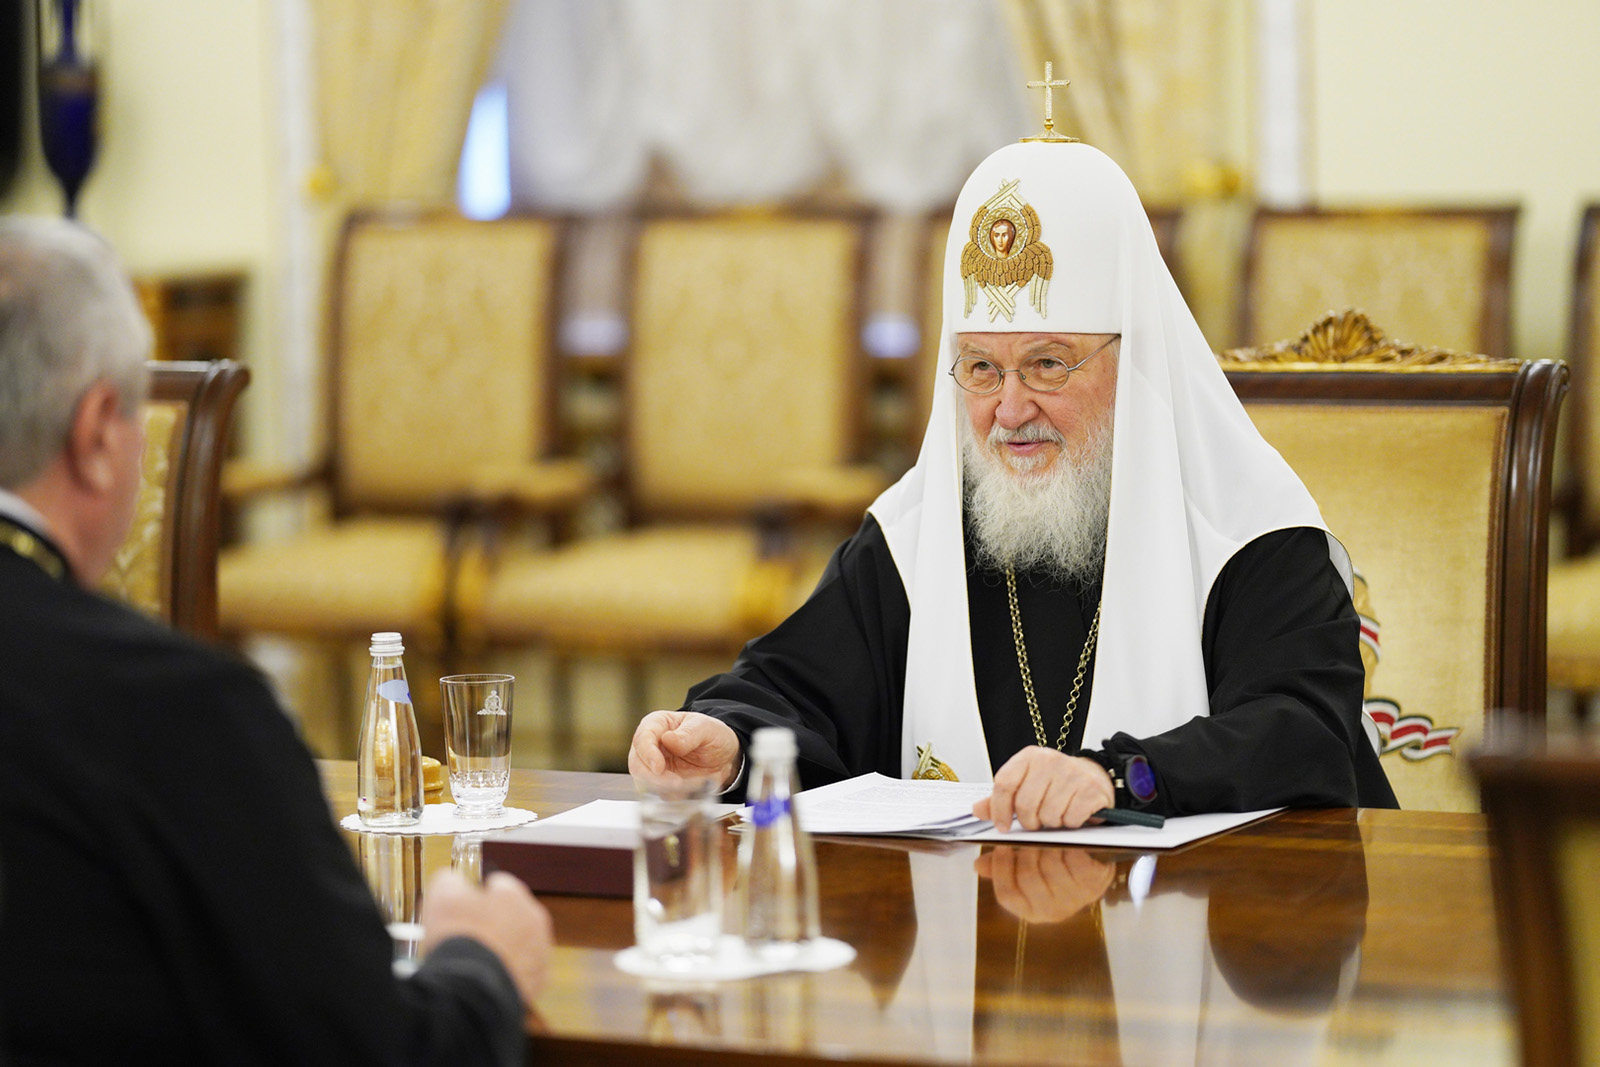 Patriarch Kirill, right, meets with World Council of Churches acting General Secretary Fr. Ioan Sauca, left, at the Patriarchal Residence in St. Daniel’s Monastery, in Moscow, Russia, on Oct. 17, 2022. Photo by Moscow Patriarchate